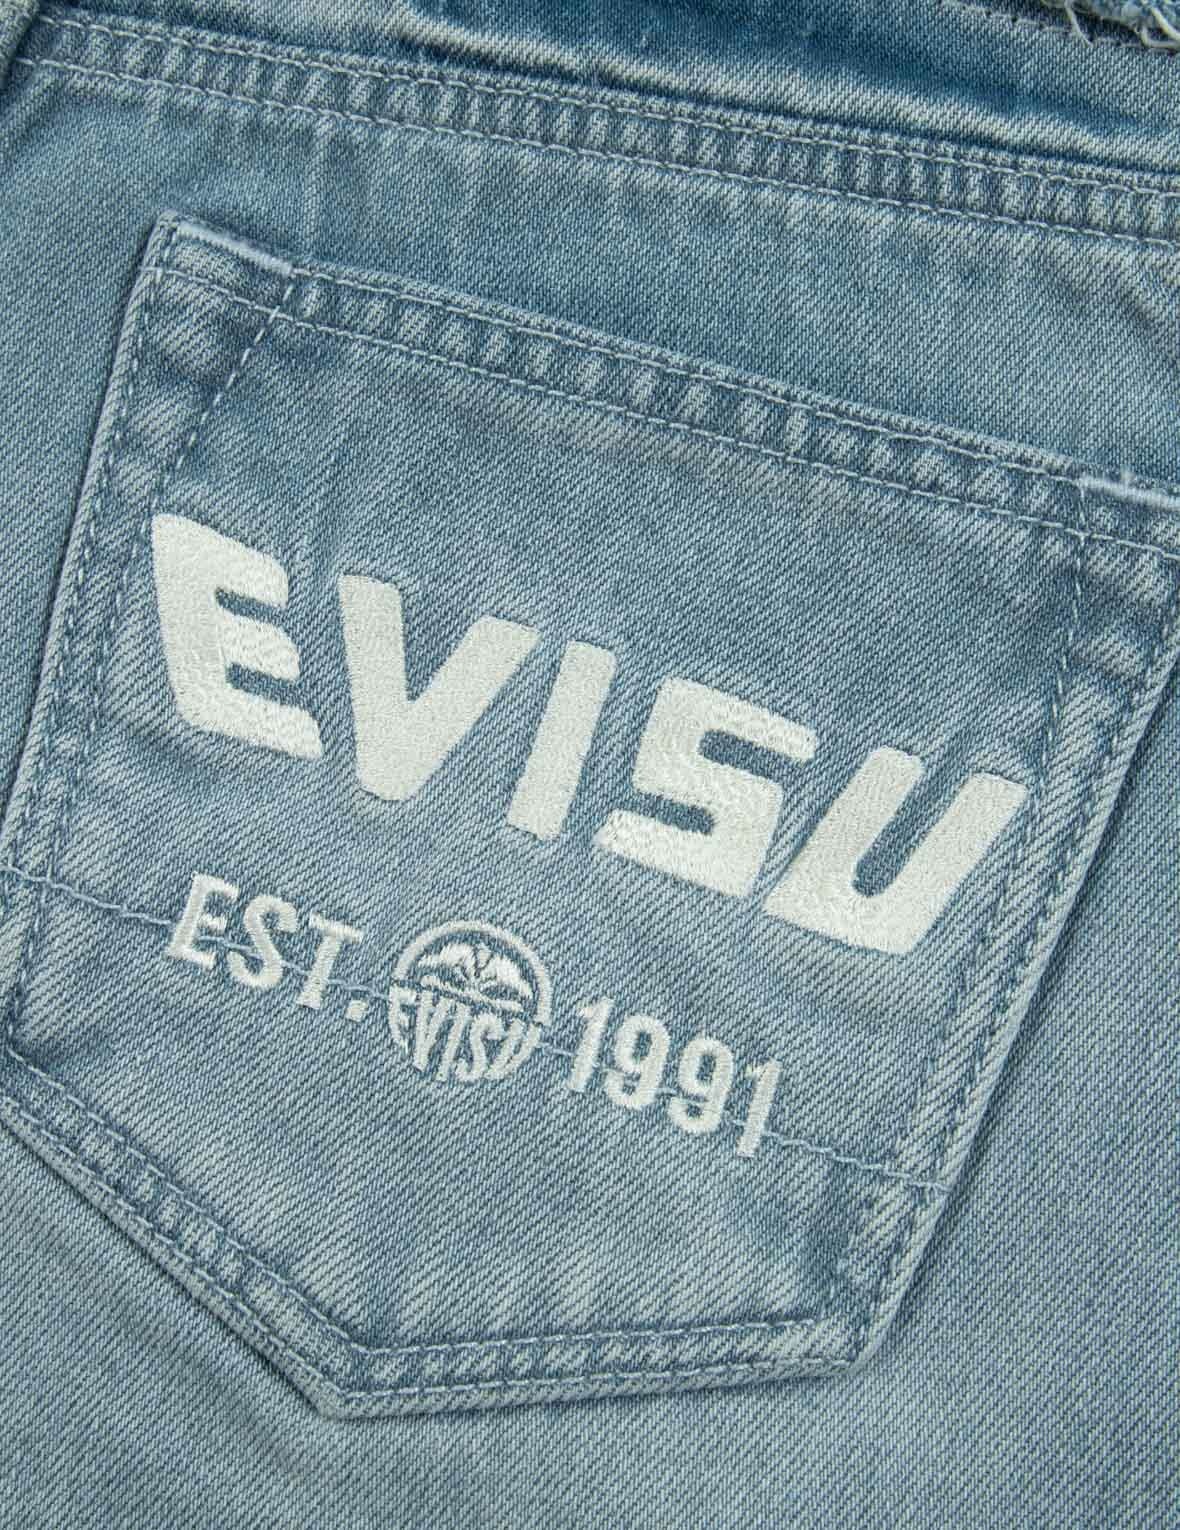 SEAGULL AND LOGO EMBROIDERY RECONSTRUCTED DENIM SHORTS - 8